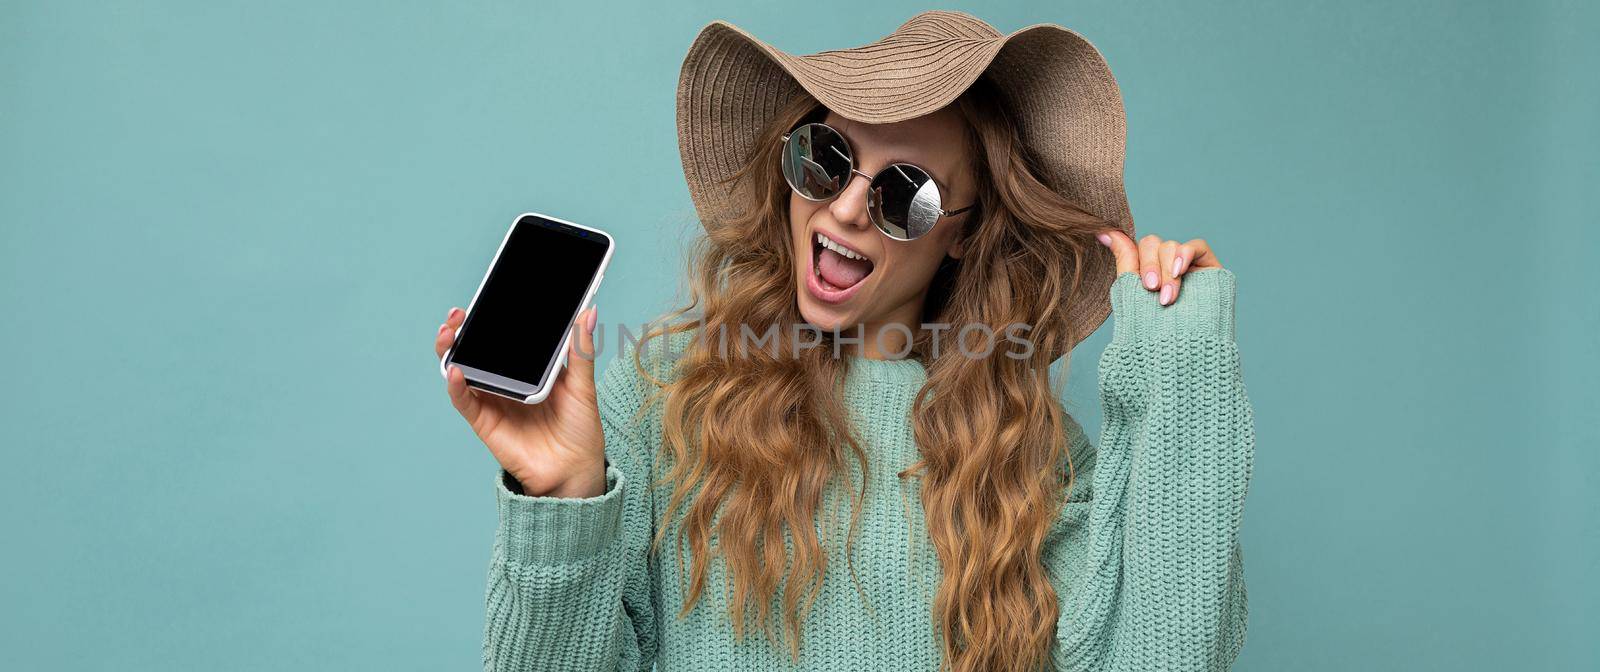 Panoramic photo of beautiful happy young blonde woman wearing sunglasses and summer hat isolated on blue background with copy space holding smartphone showing phone in hand with empty screen display looking at camera with open mouth by TRMK